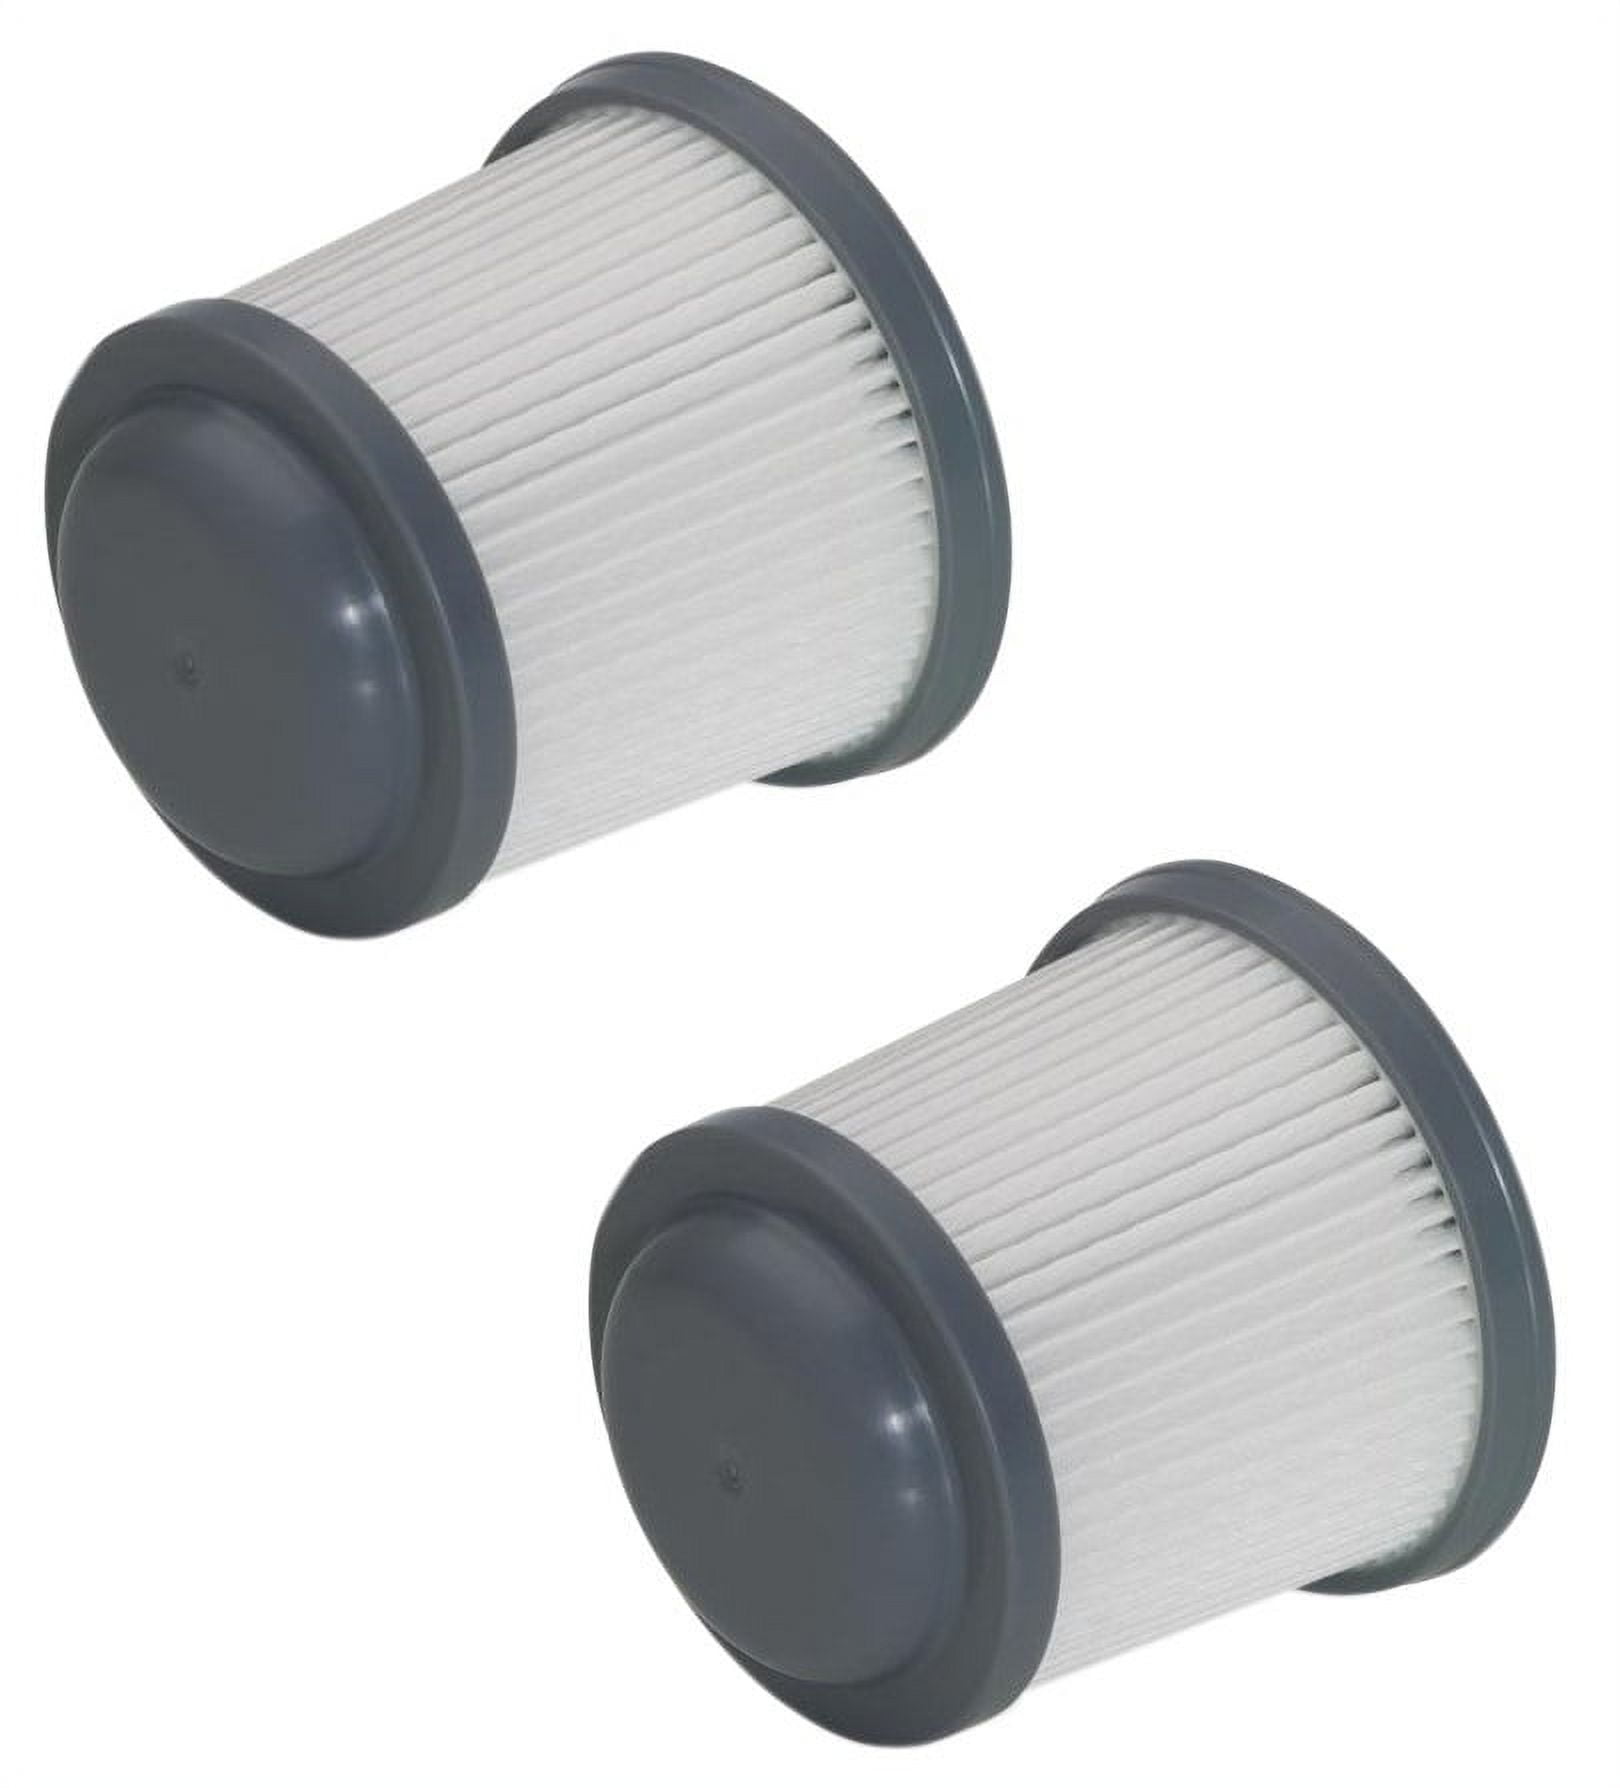 Black & Decker PVF110 Replacement Filter, Pack of 2